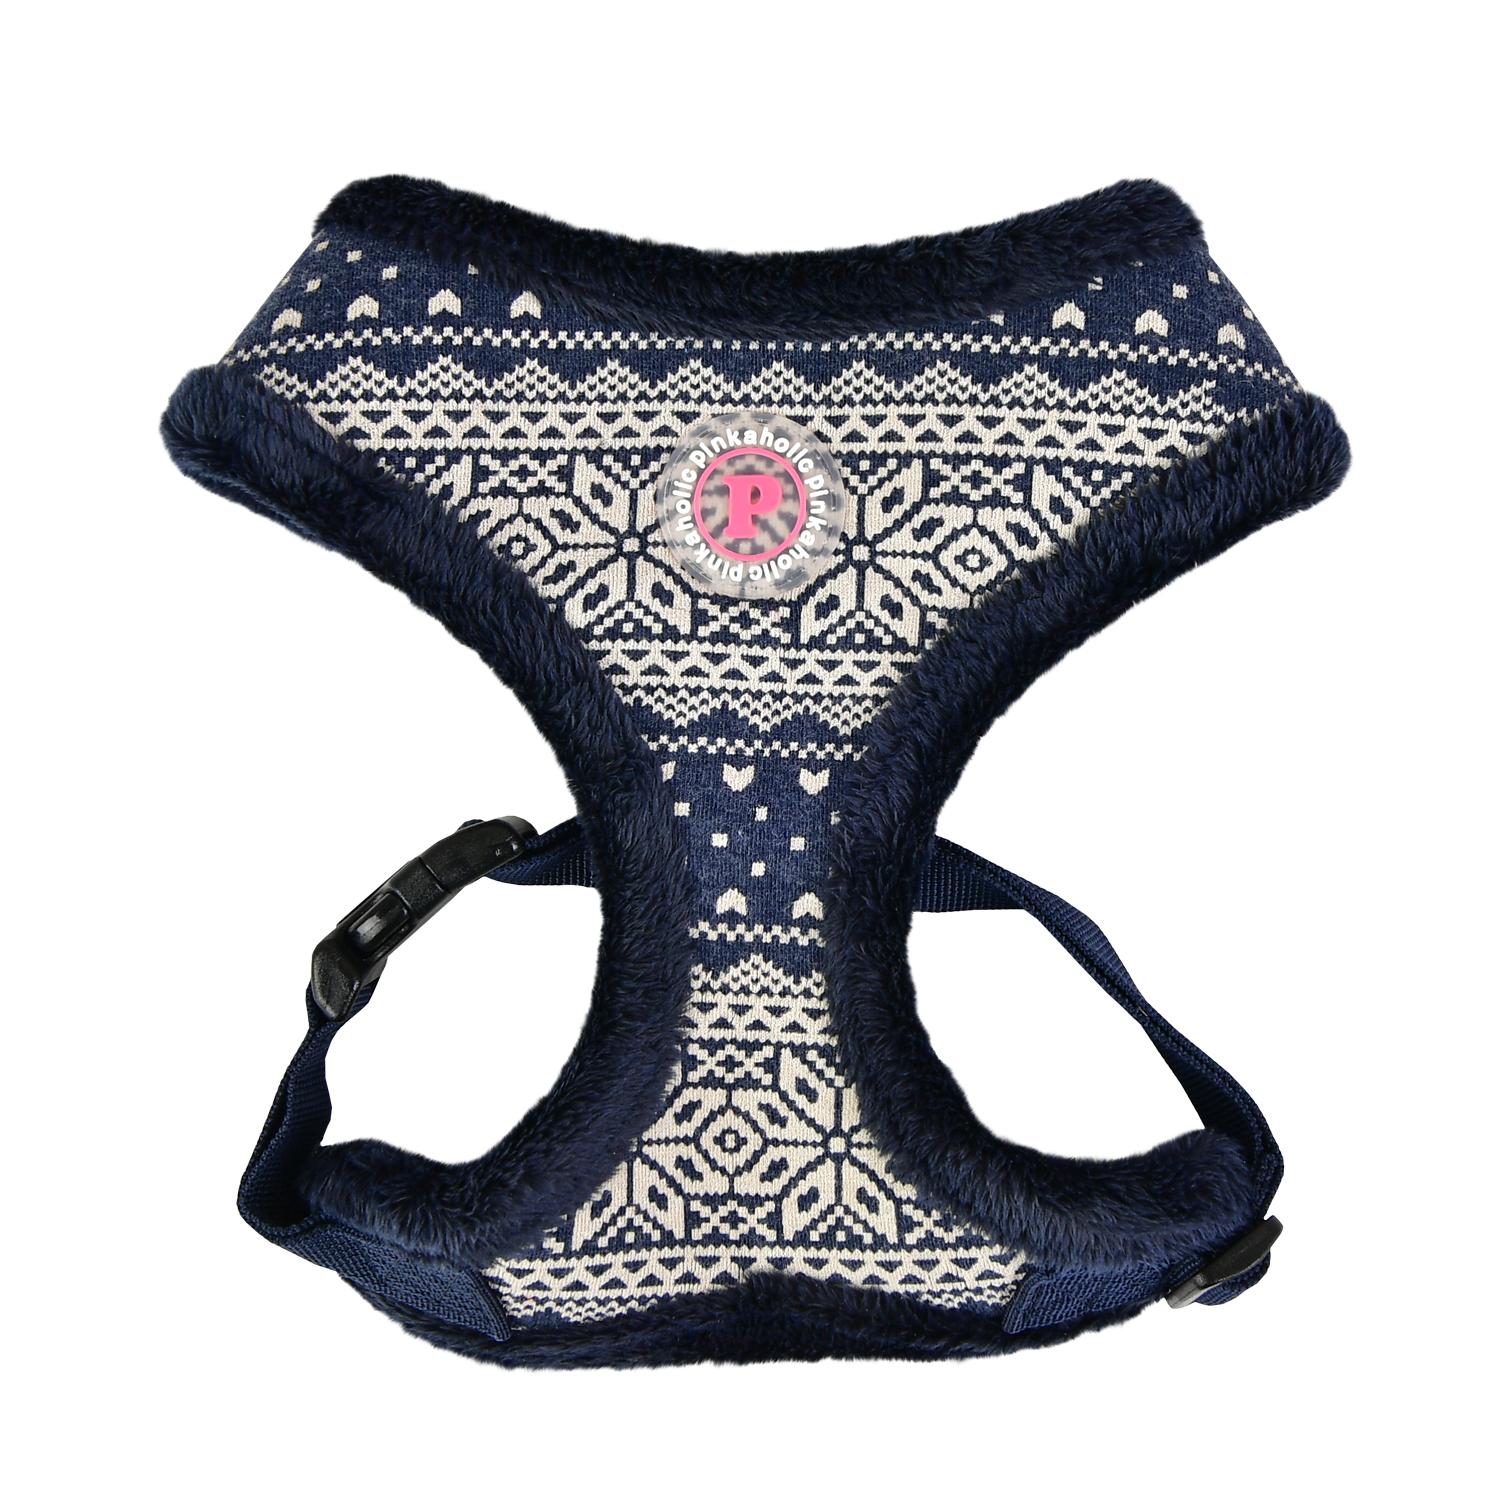 Neige Dog Harness by Pinkaholic - Navy